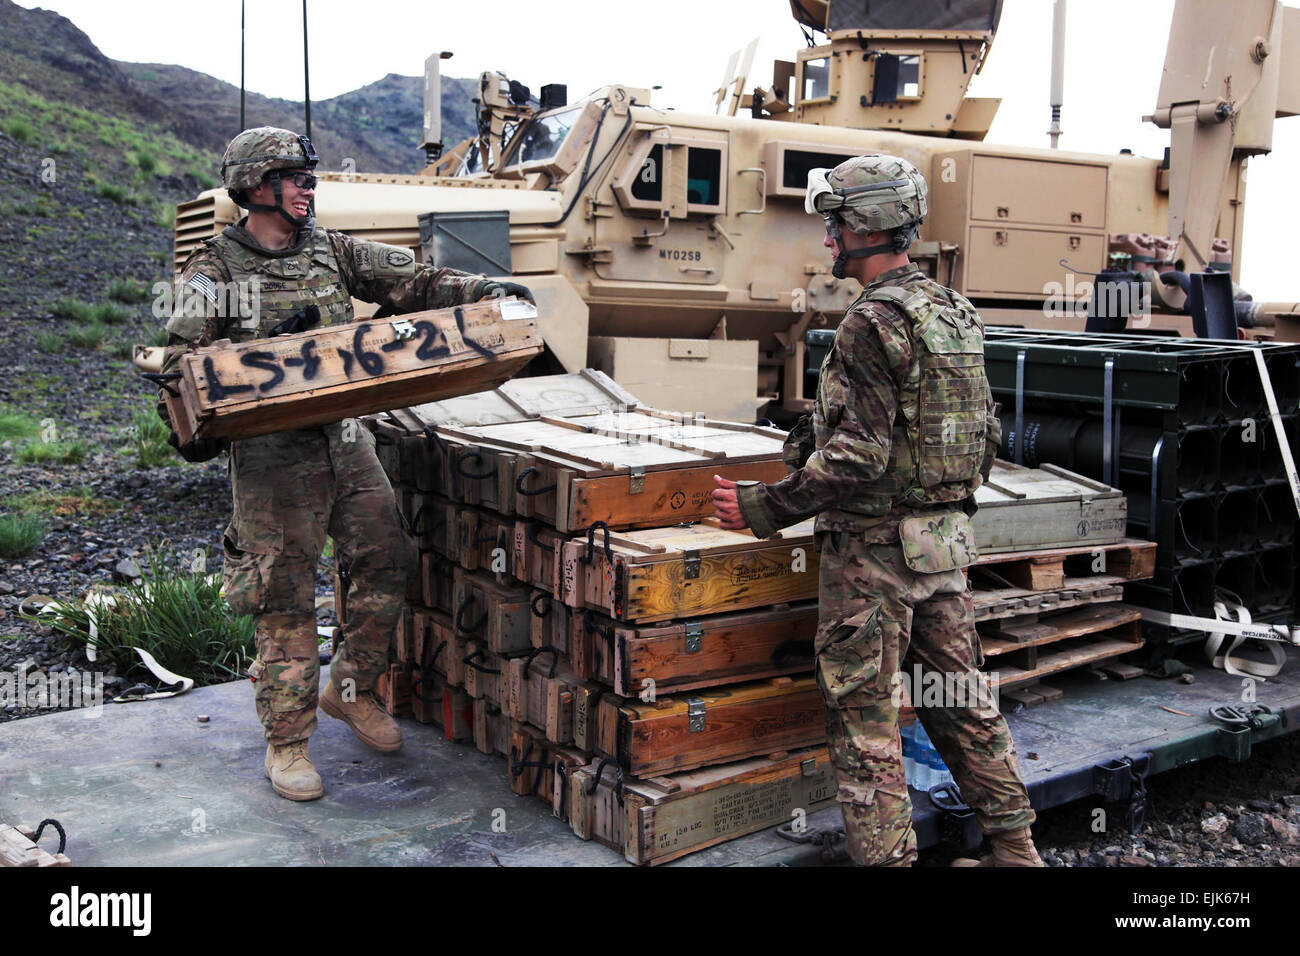 U.S. Soldiers assigned to 706th Explosive Ordinance Disposal EOD Company, Task Force 4-25, load empty ordinance boxes onto a truck at the demolition range on Forward Operating Base Salerno, Khost province, Afghanistan, Sept. 2, 2012. EOD Soldiers disposed of ordinance and equipment that was determined to be unusable.  Sgt. Kimberly Trumbull Stock Photo